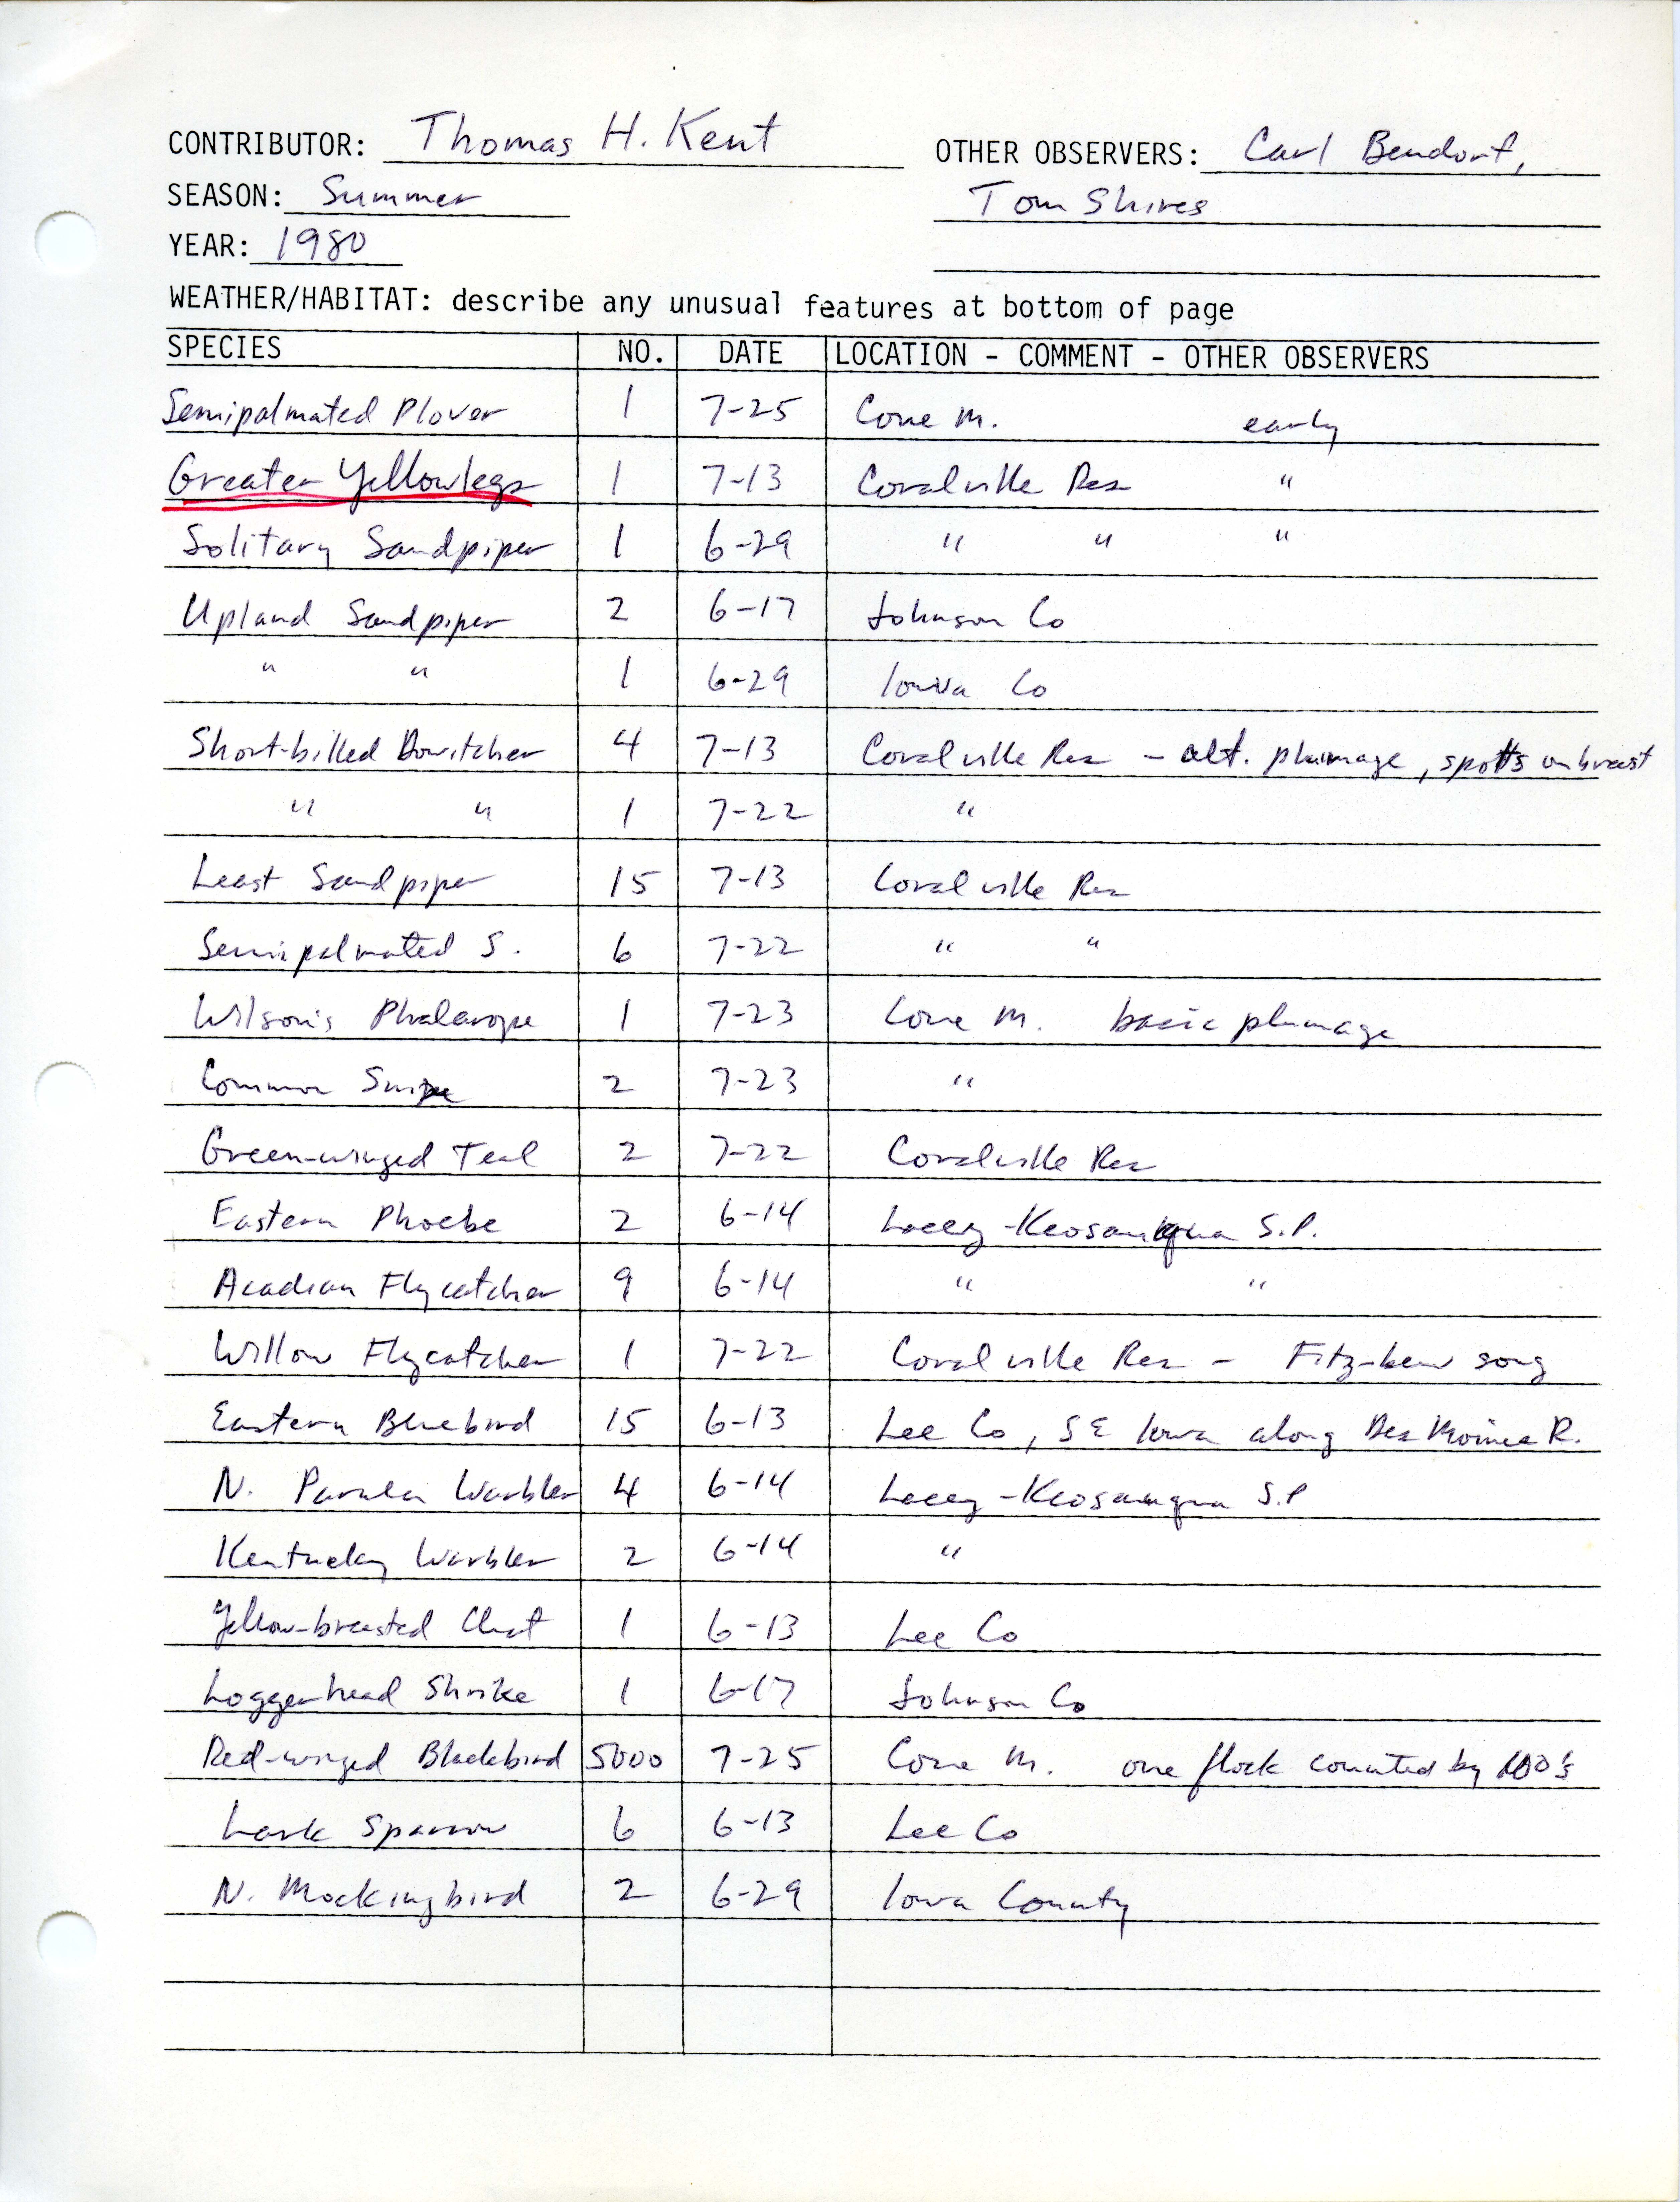 Field notes contributed by Thomas H. Kent, summer 1980